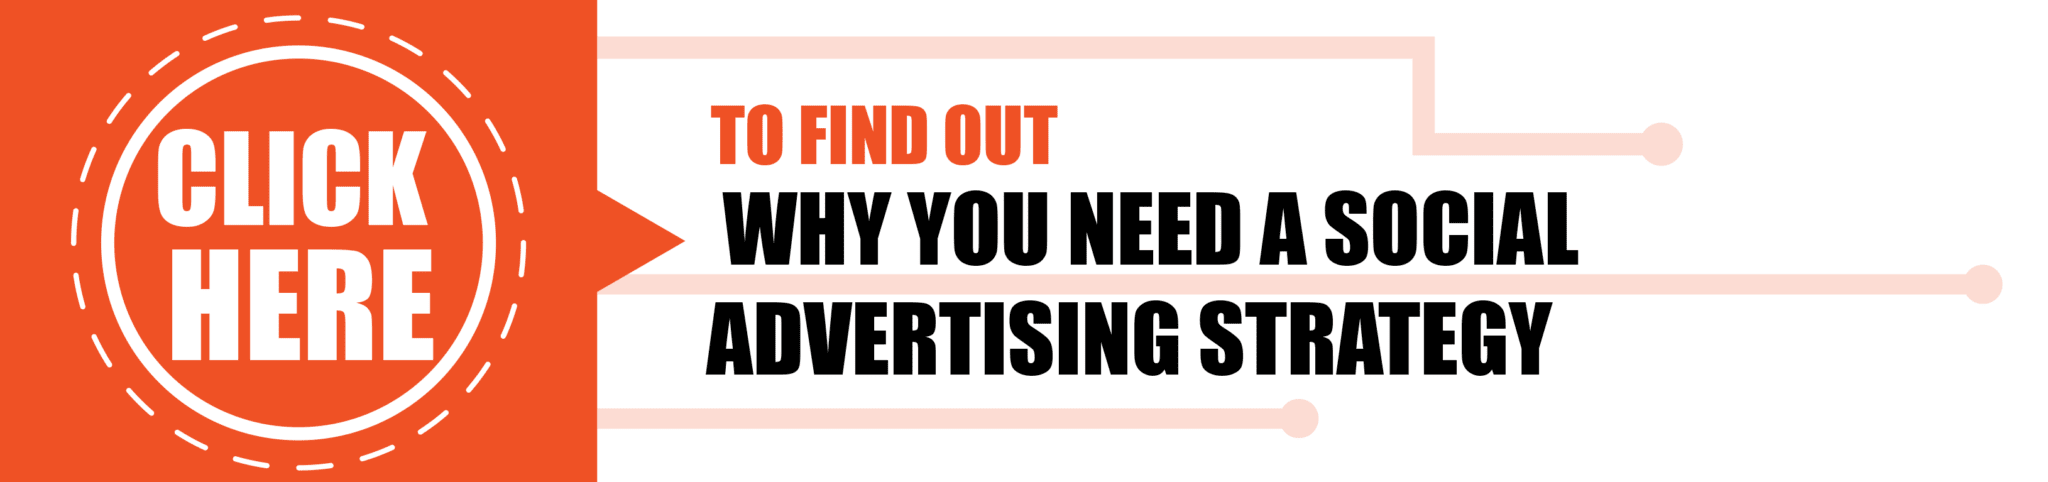 Why You Need a Social Advertising Strategy